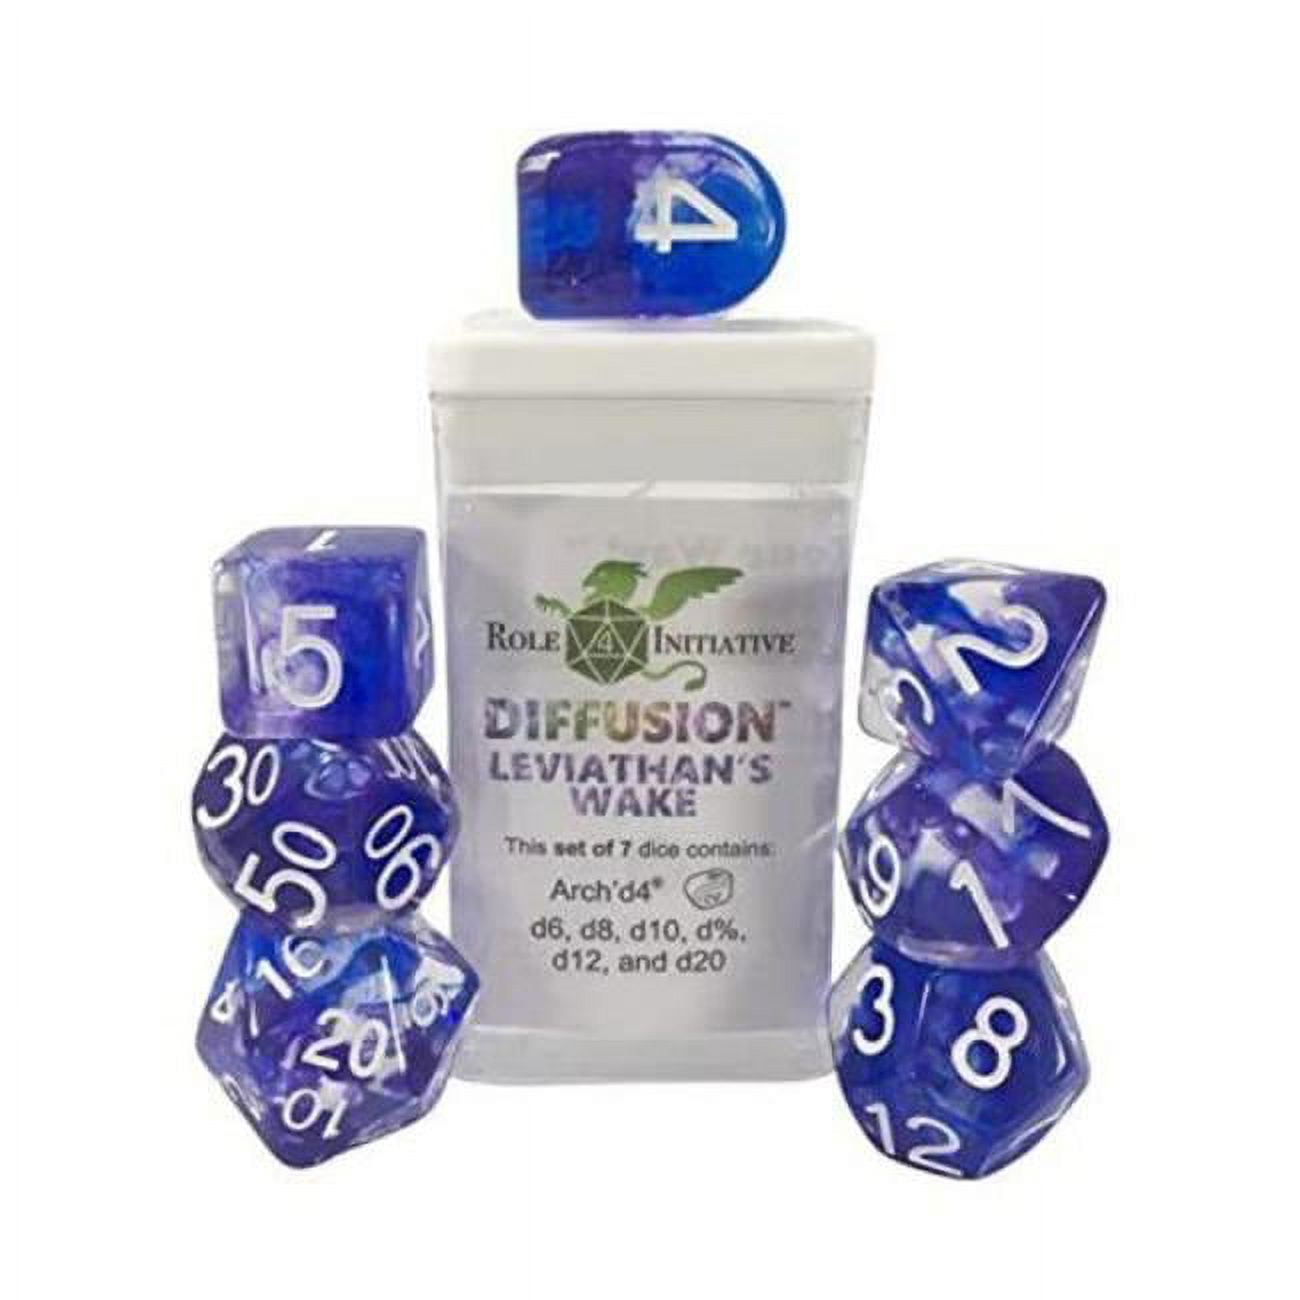 Picture of Role 4 Initiative R4I50537-7C-S Diffusion Leviathans Wake SPR Dice, Set of 7